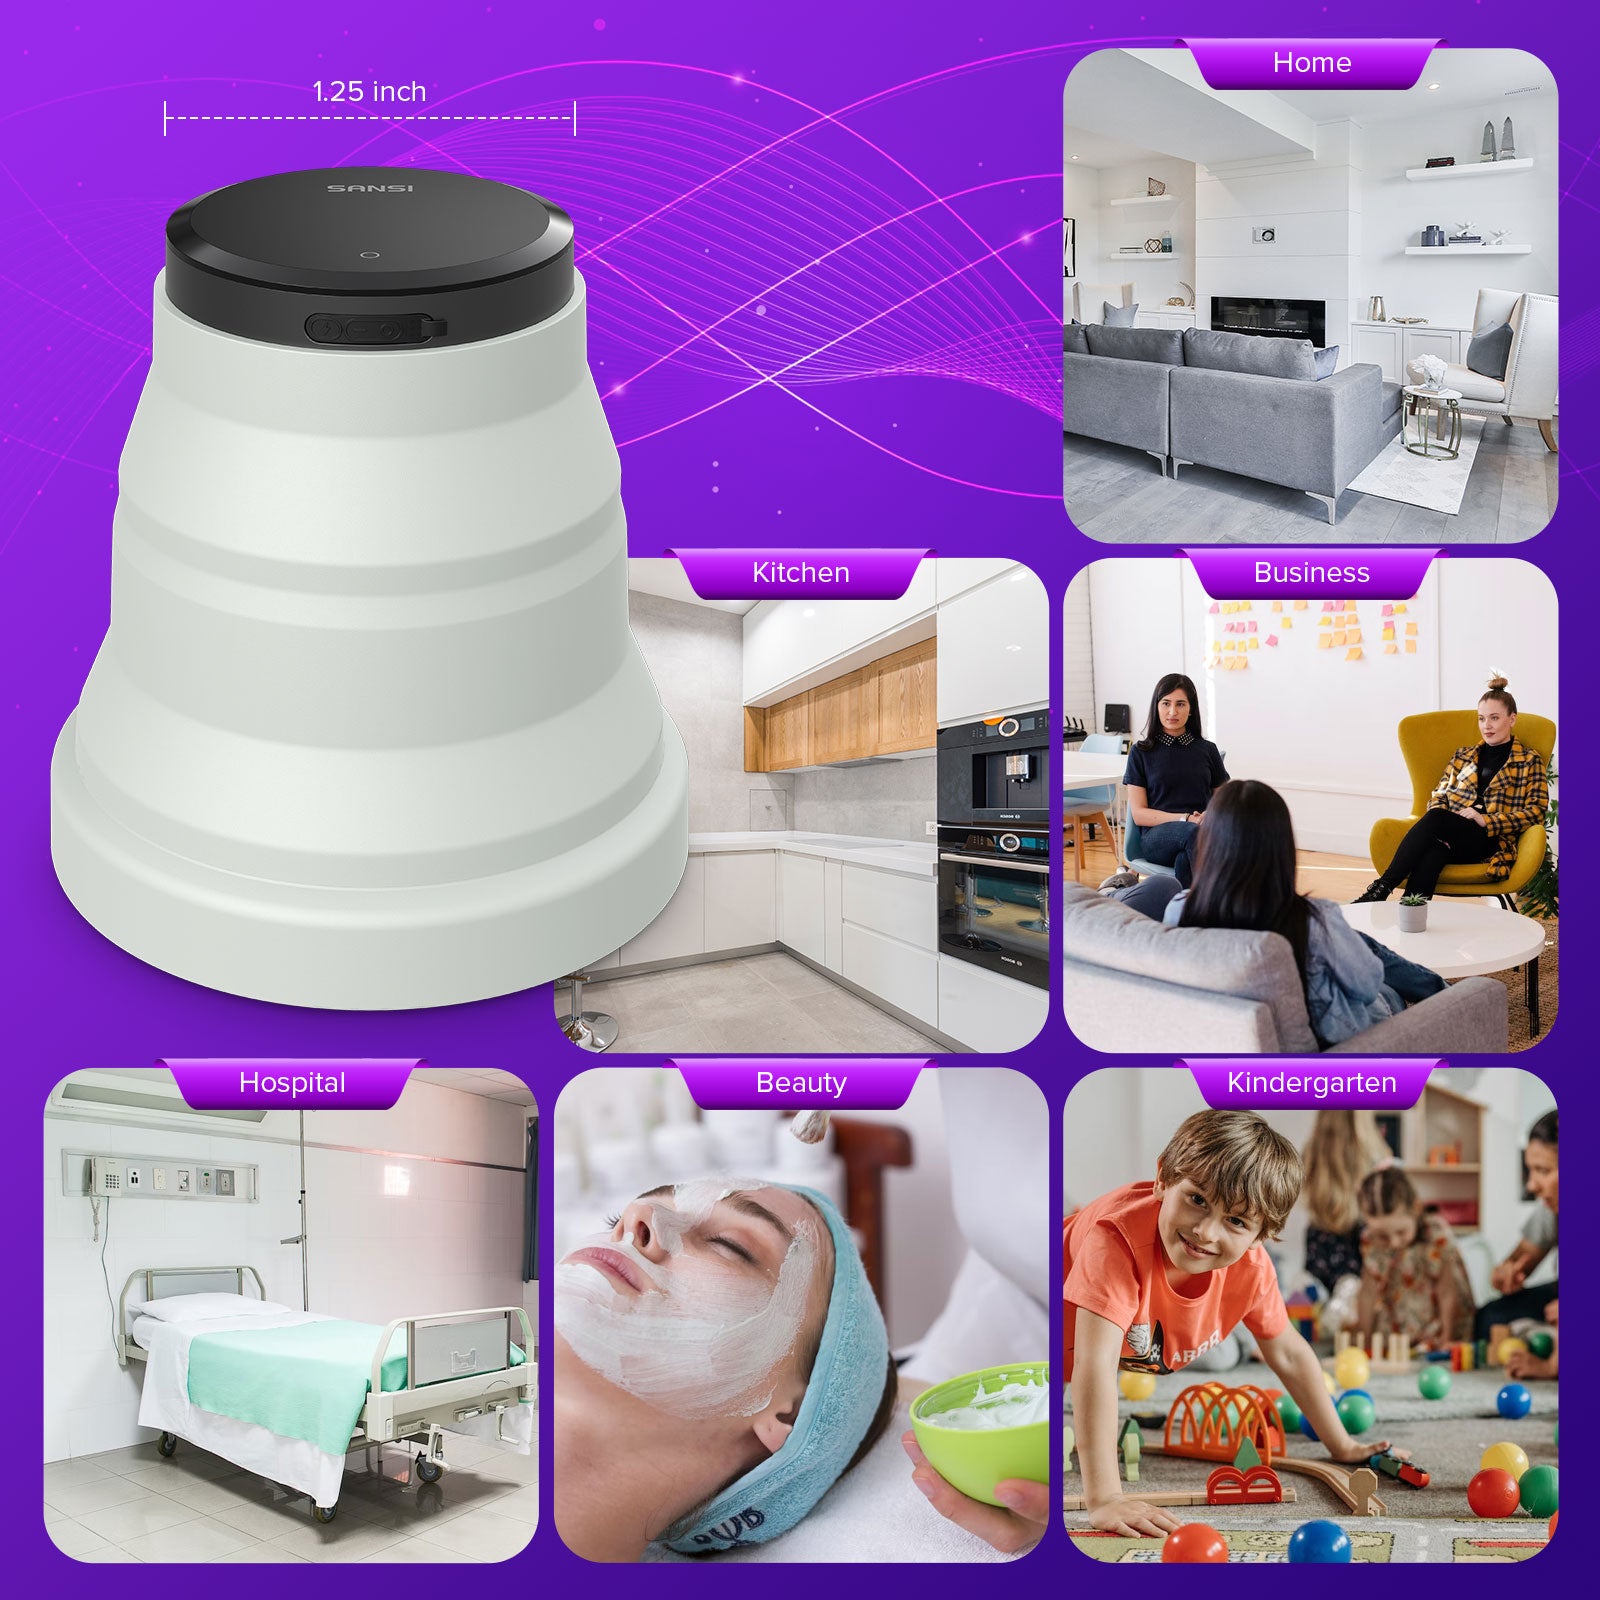 Portable UV Hand Light is suitable for home, kitchen, business, hospital, beauty and kindergarten